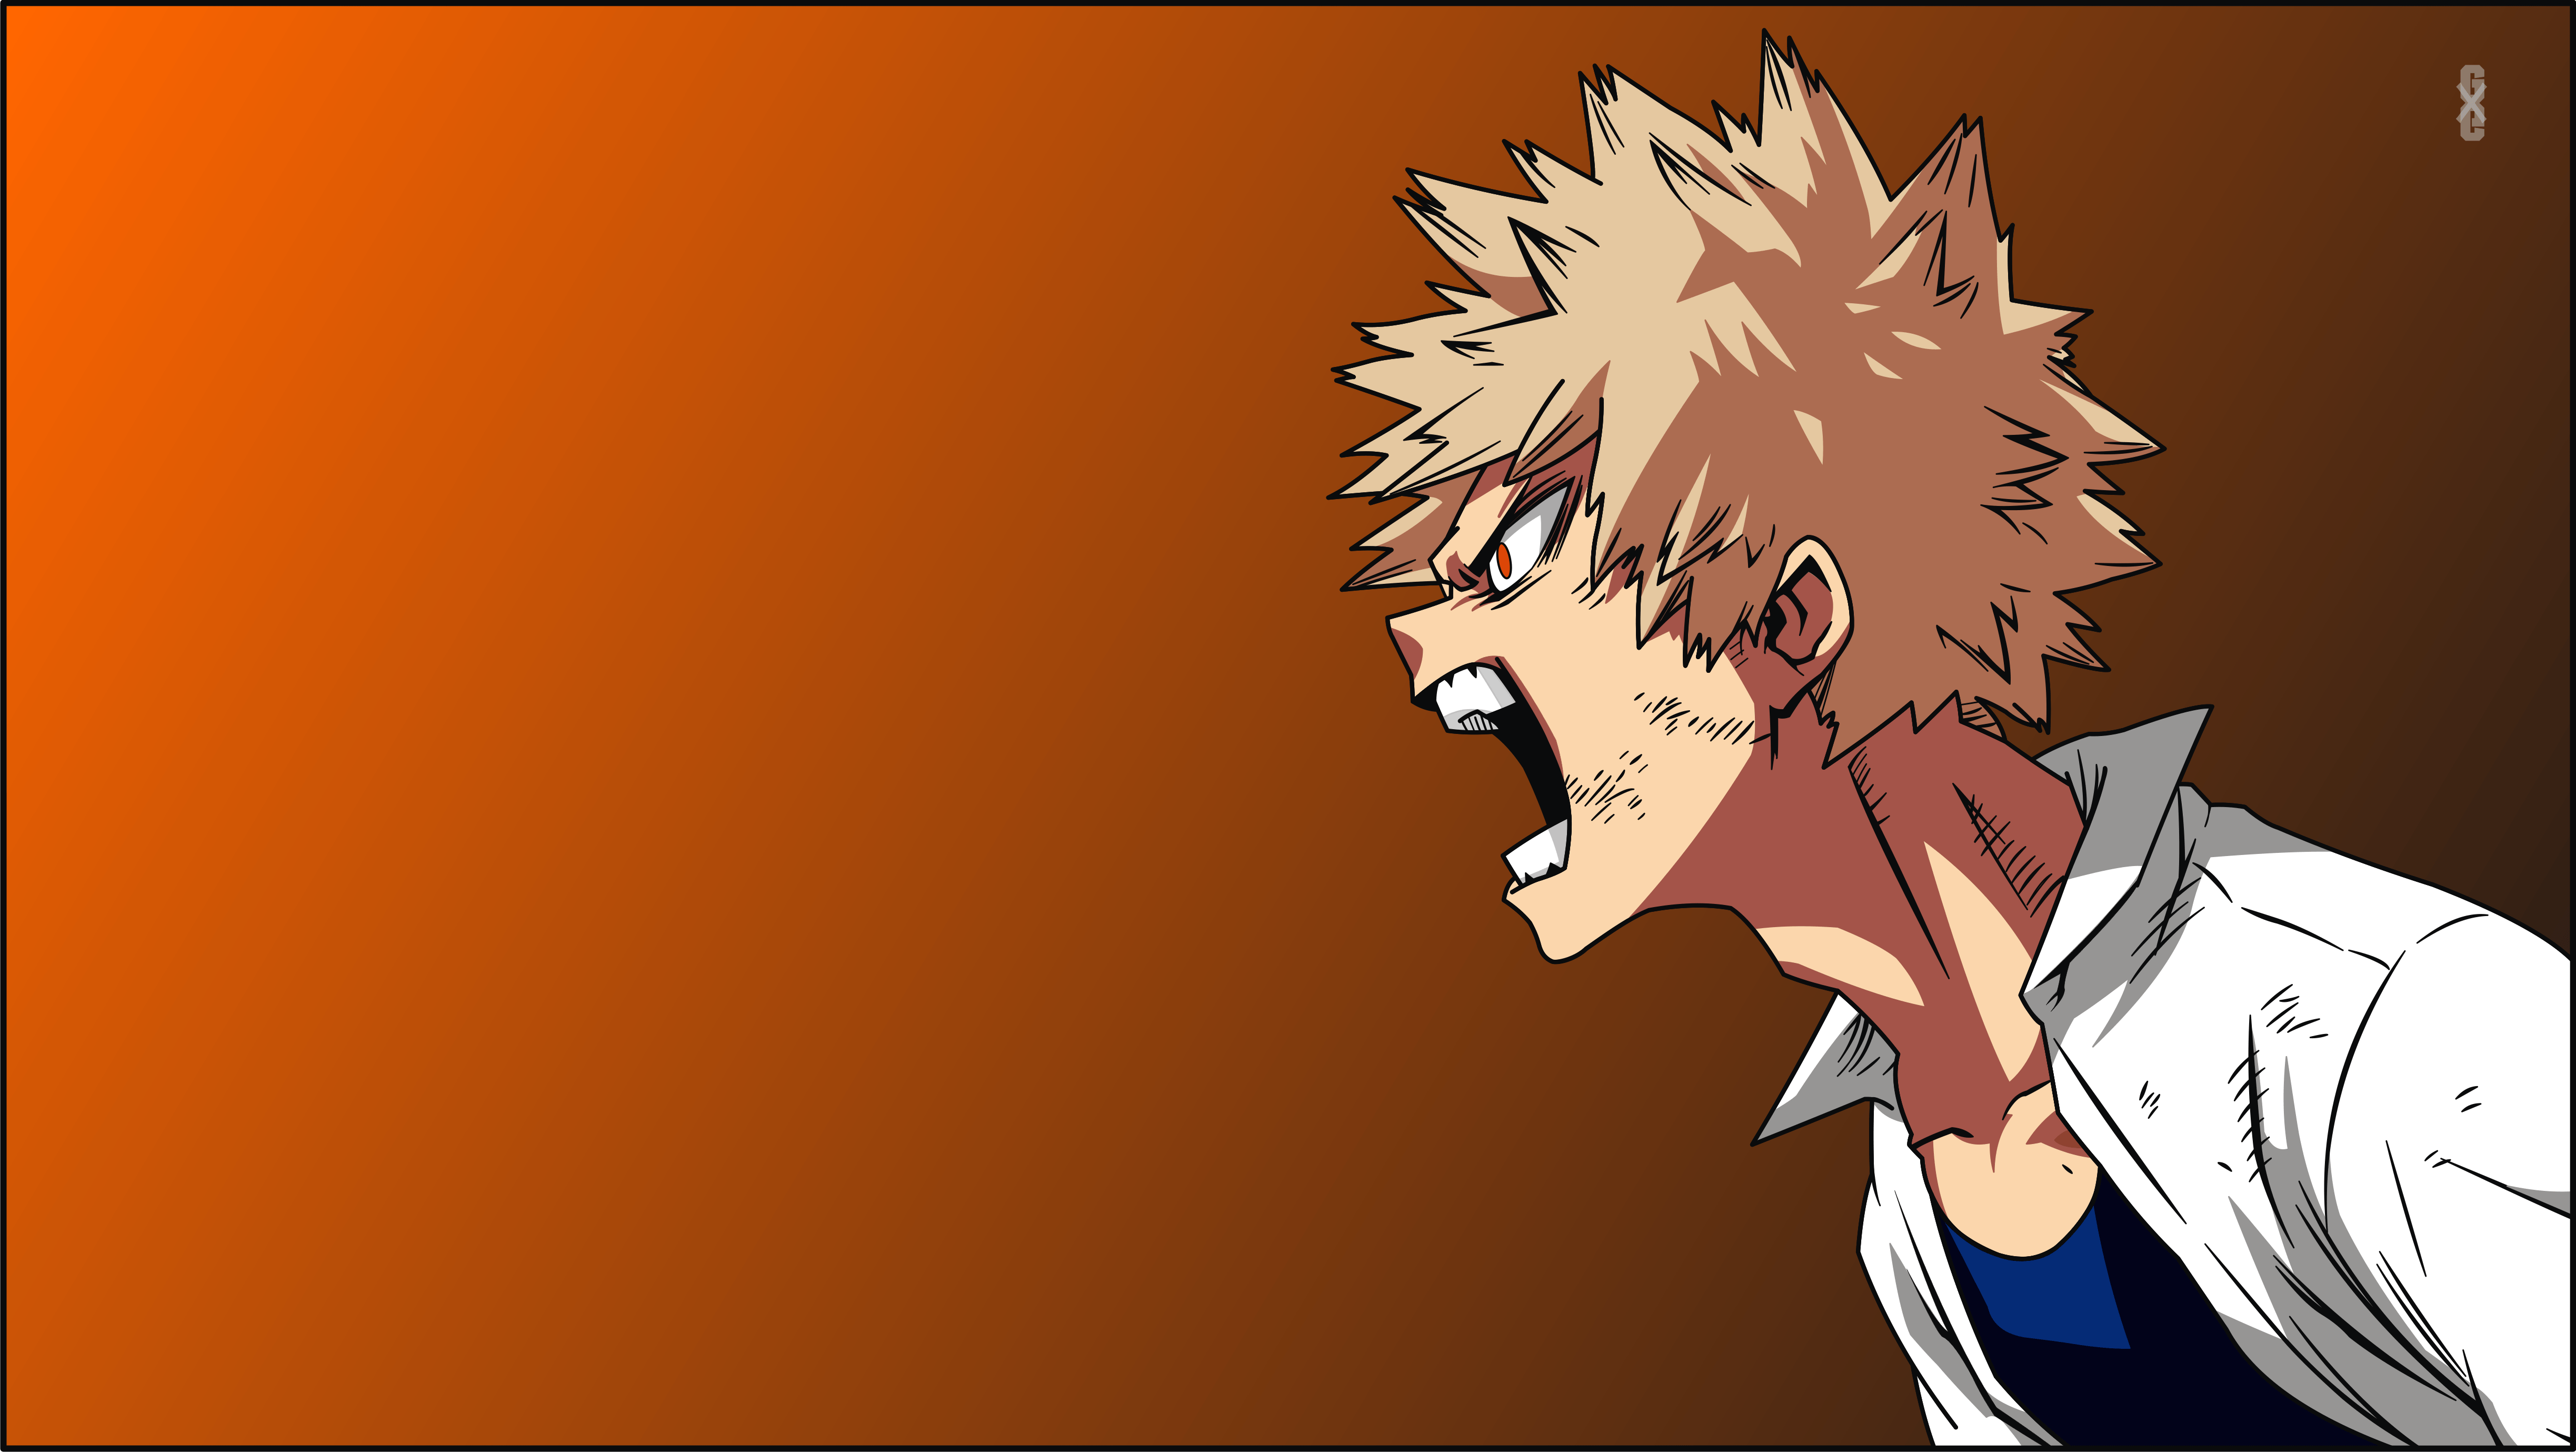 Boku no Hero Academia wallpaper featuring Bakugo in a blue shirt and white jacket with his mouth open in anger - Bakugo